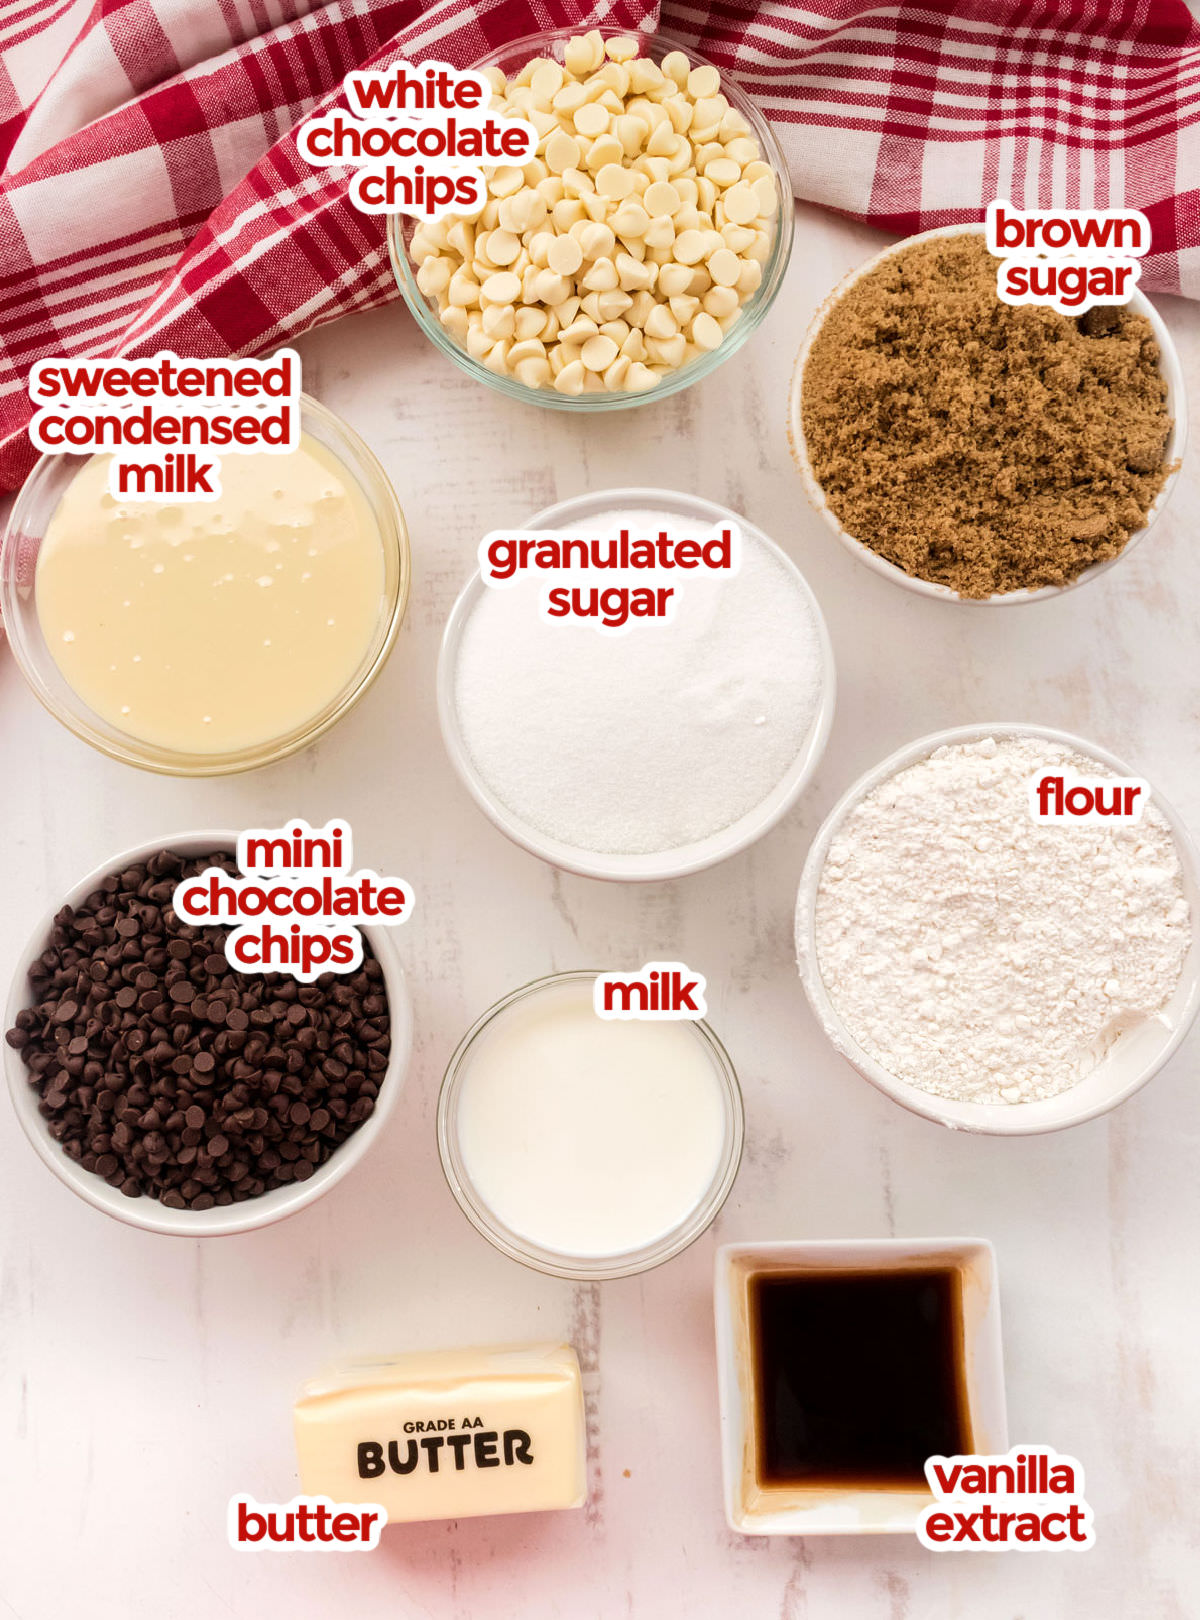 All the ingredients you will need to make Cookie Dough Fudge including White Chocolate Chips, Brown Sugar, Granulated Sugar, Sweetened Condensed Milk, Flour, Milk, Butter, Vanilla and Mini Chocolate Chips.